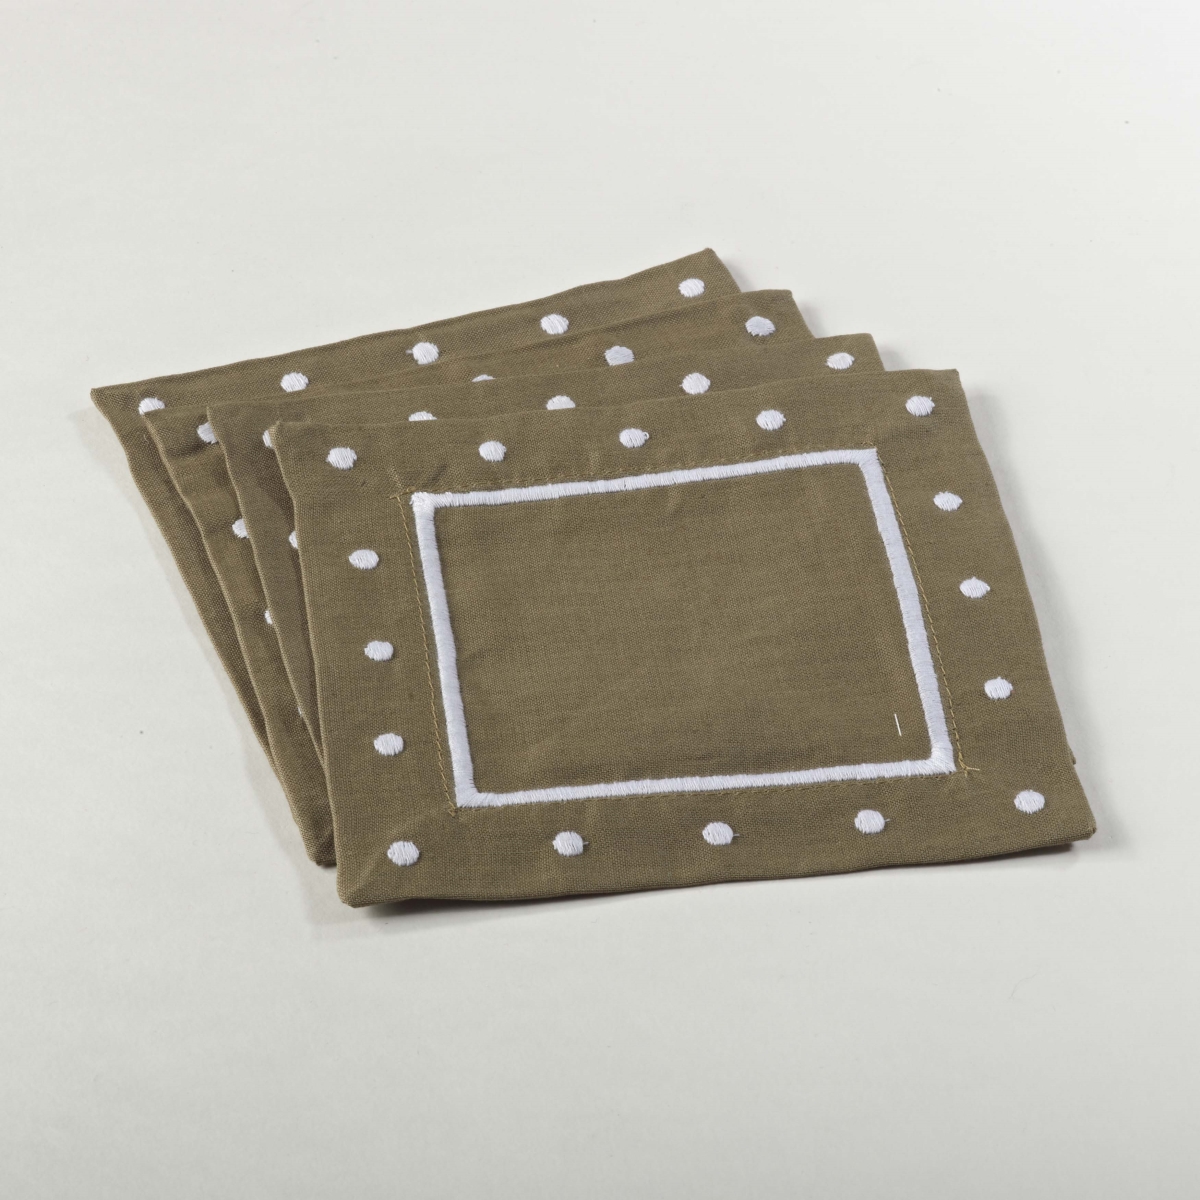 7551.ol6s 6 In. Hampton Bay Square Embroidered Coaster With Dotted Border - Olive, Set Of 4